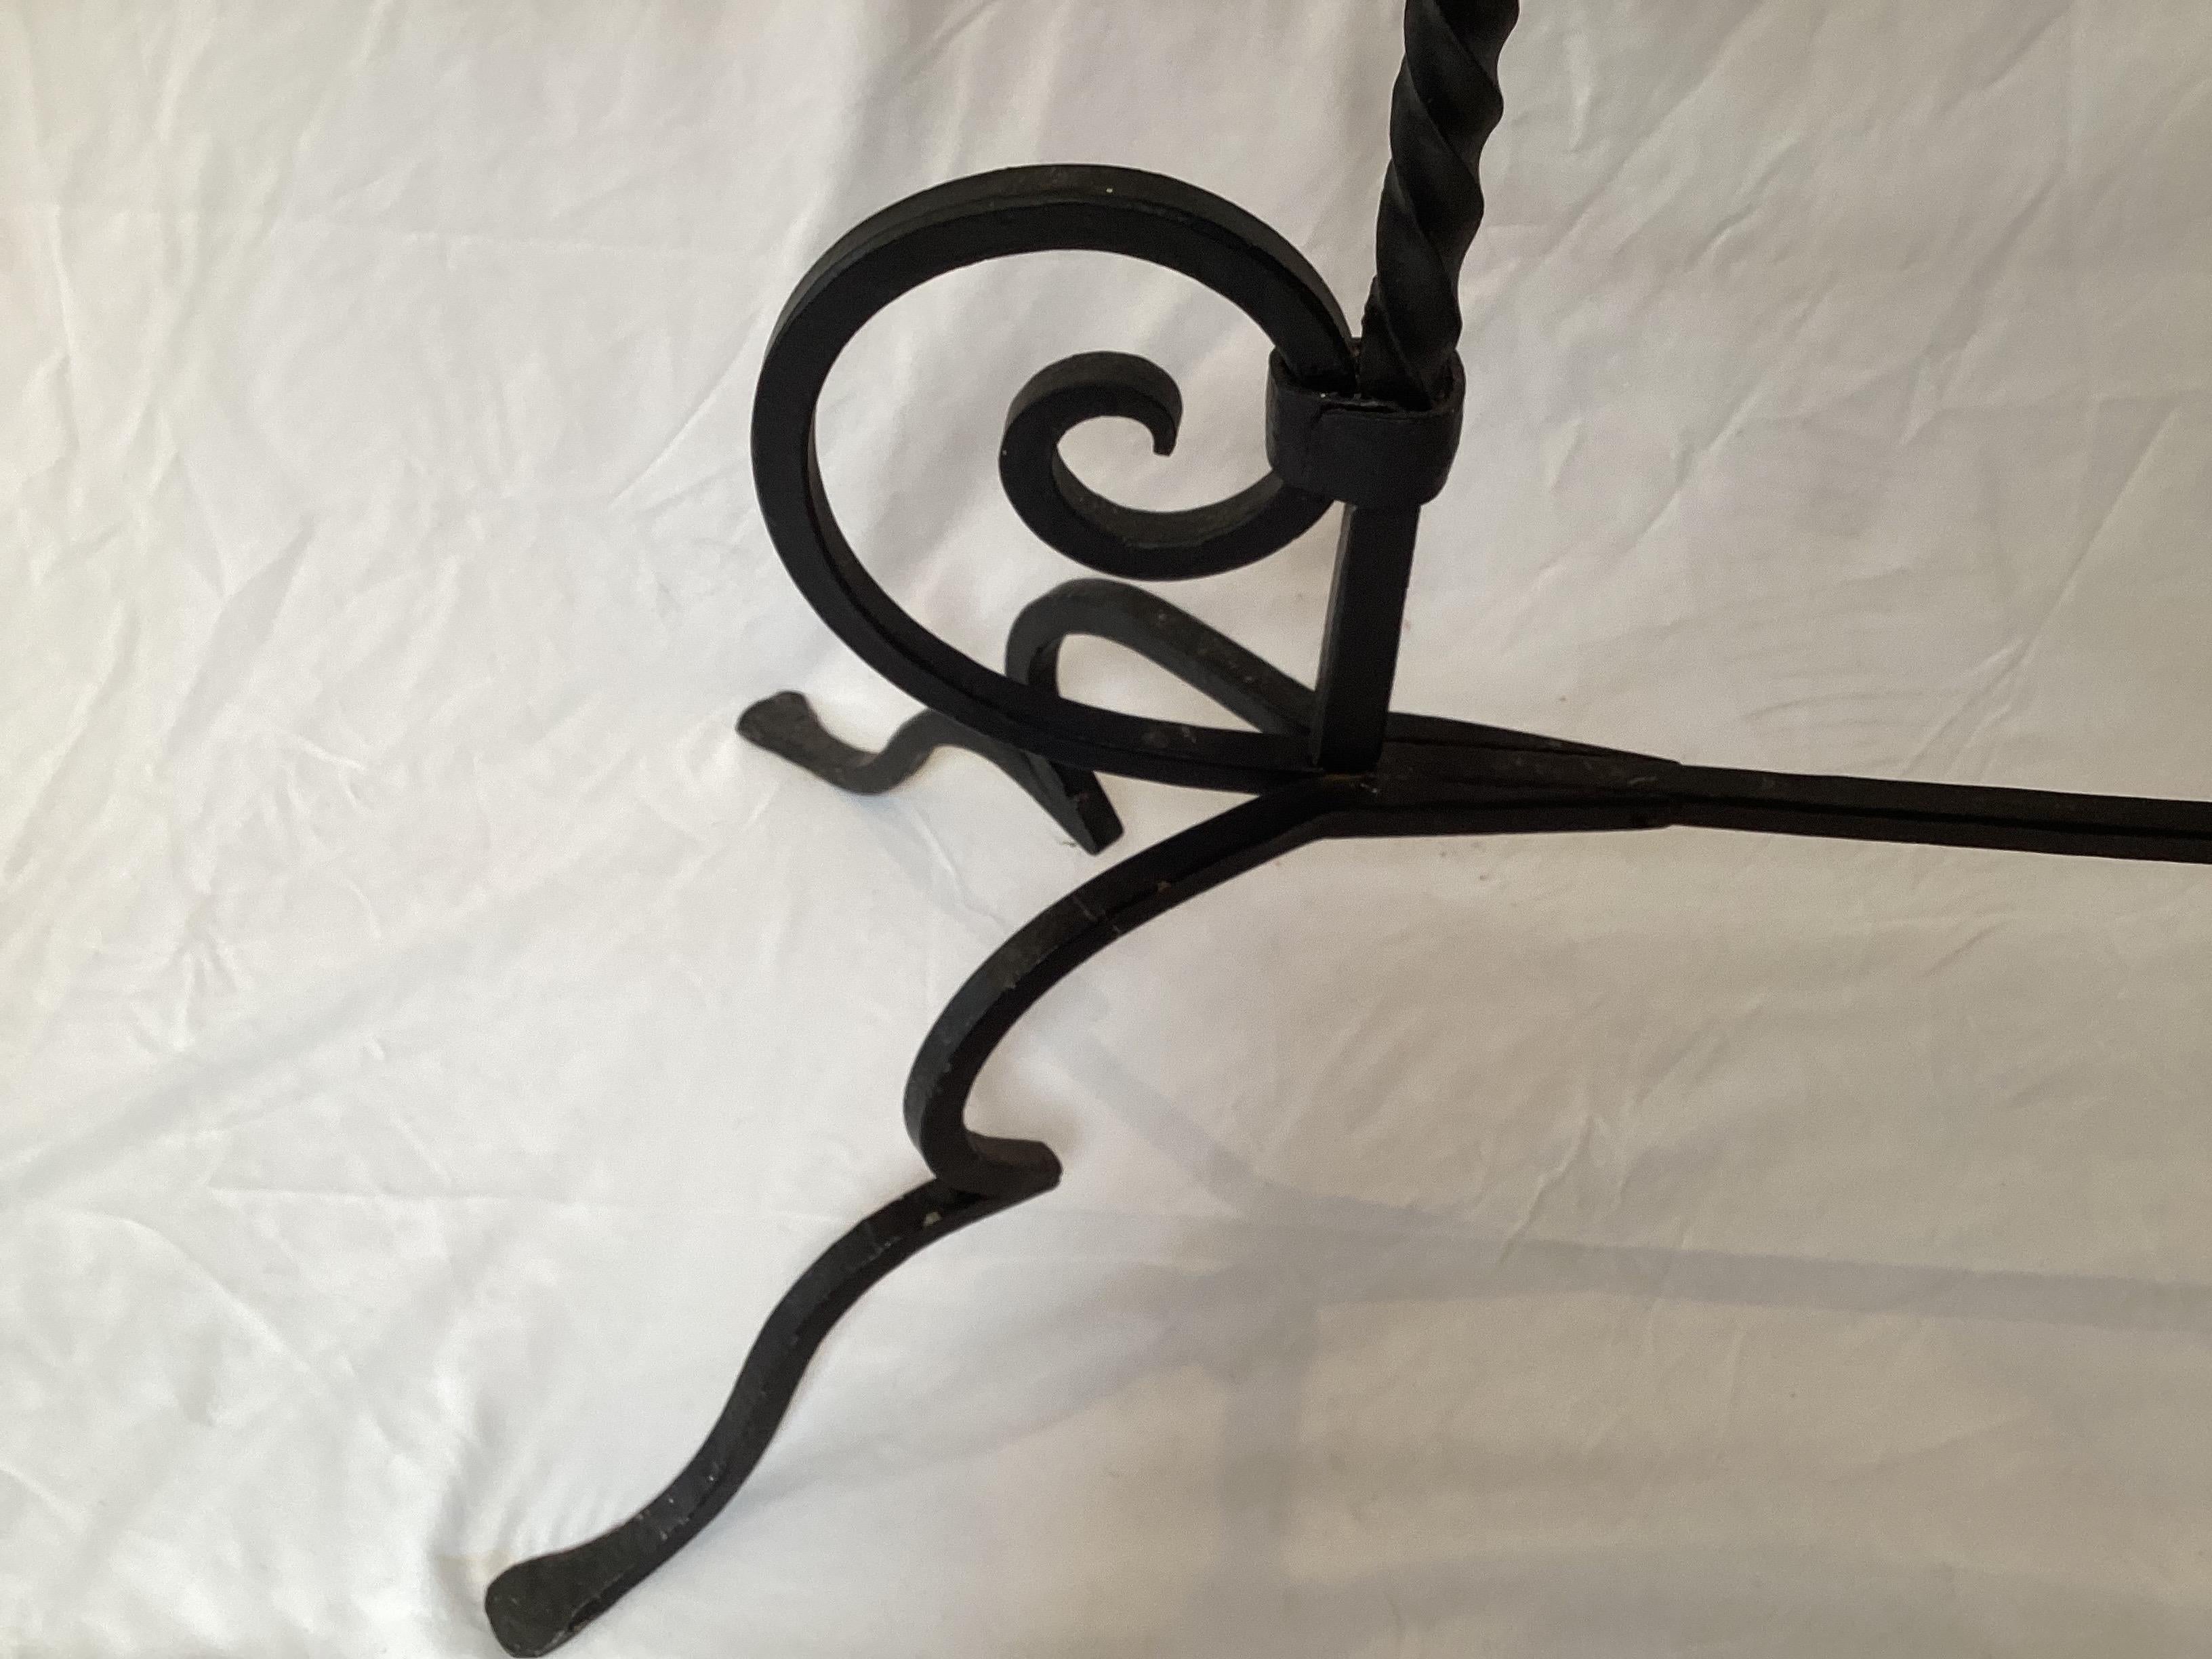 Large Black Wrought Iron Plant Stand or Candle Holder Holds 6 Plants or Candles. Great for indoor and outdoor use. 42” wide by 14” deep by 34” tall. Each dish will hold a 4 1/2” pot. Great condition with minor age-appropriate wear.